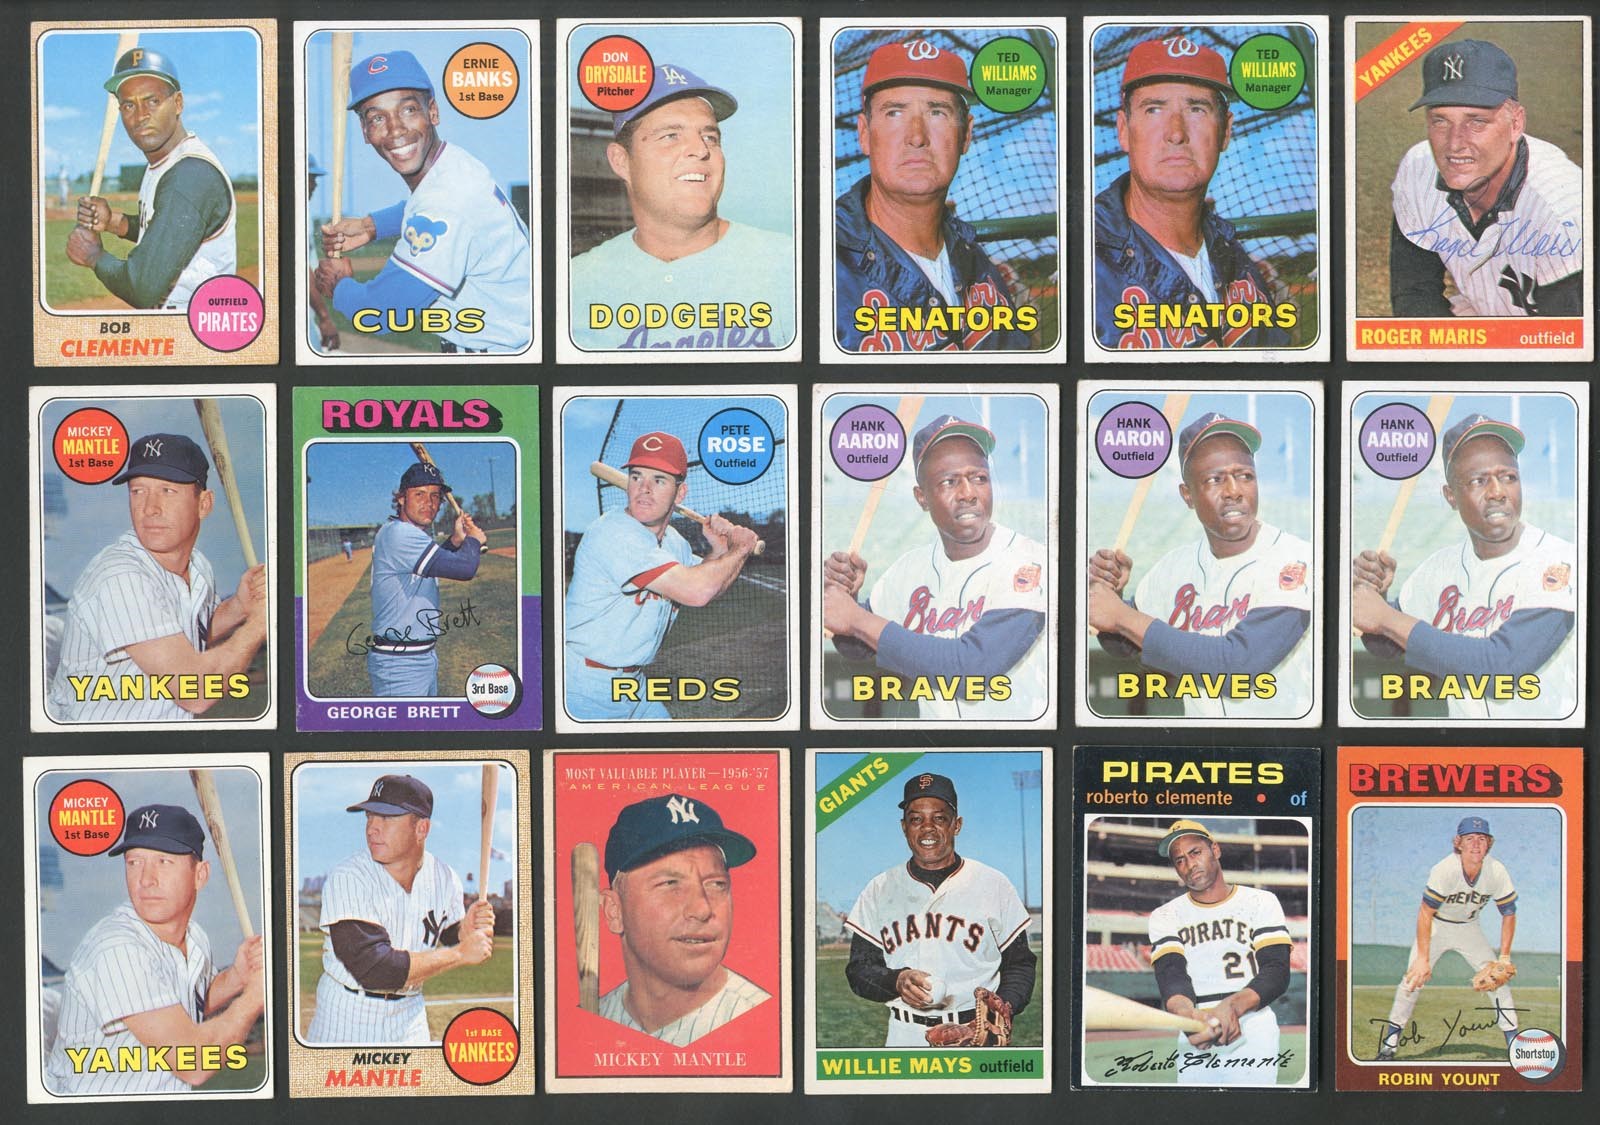 Baseball and Trading Cards - 1950s-70s Topps Collection with Major Stars - Four Mantles & Maris Signed (440+)